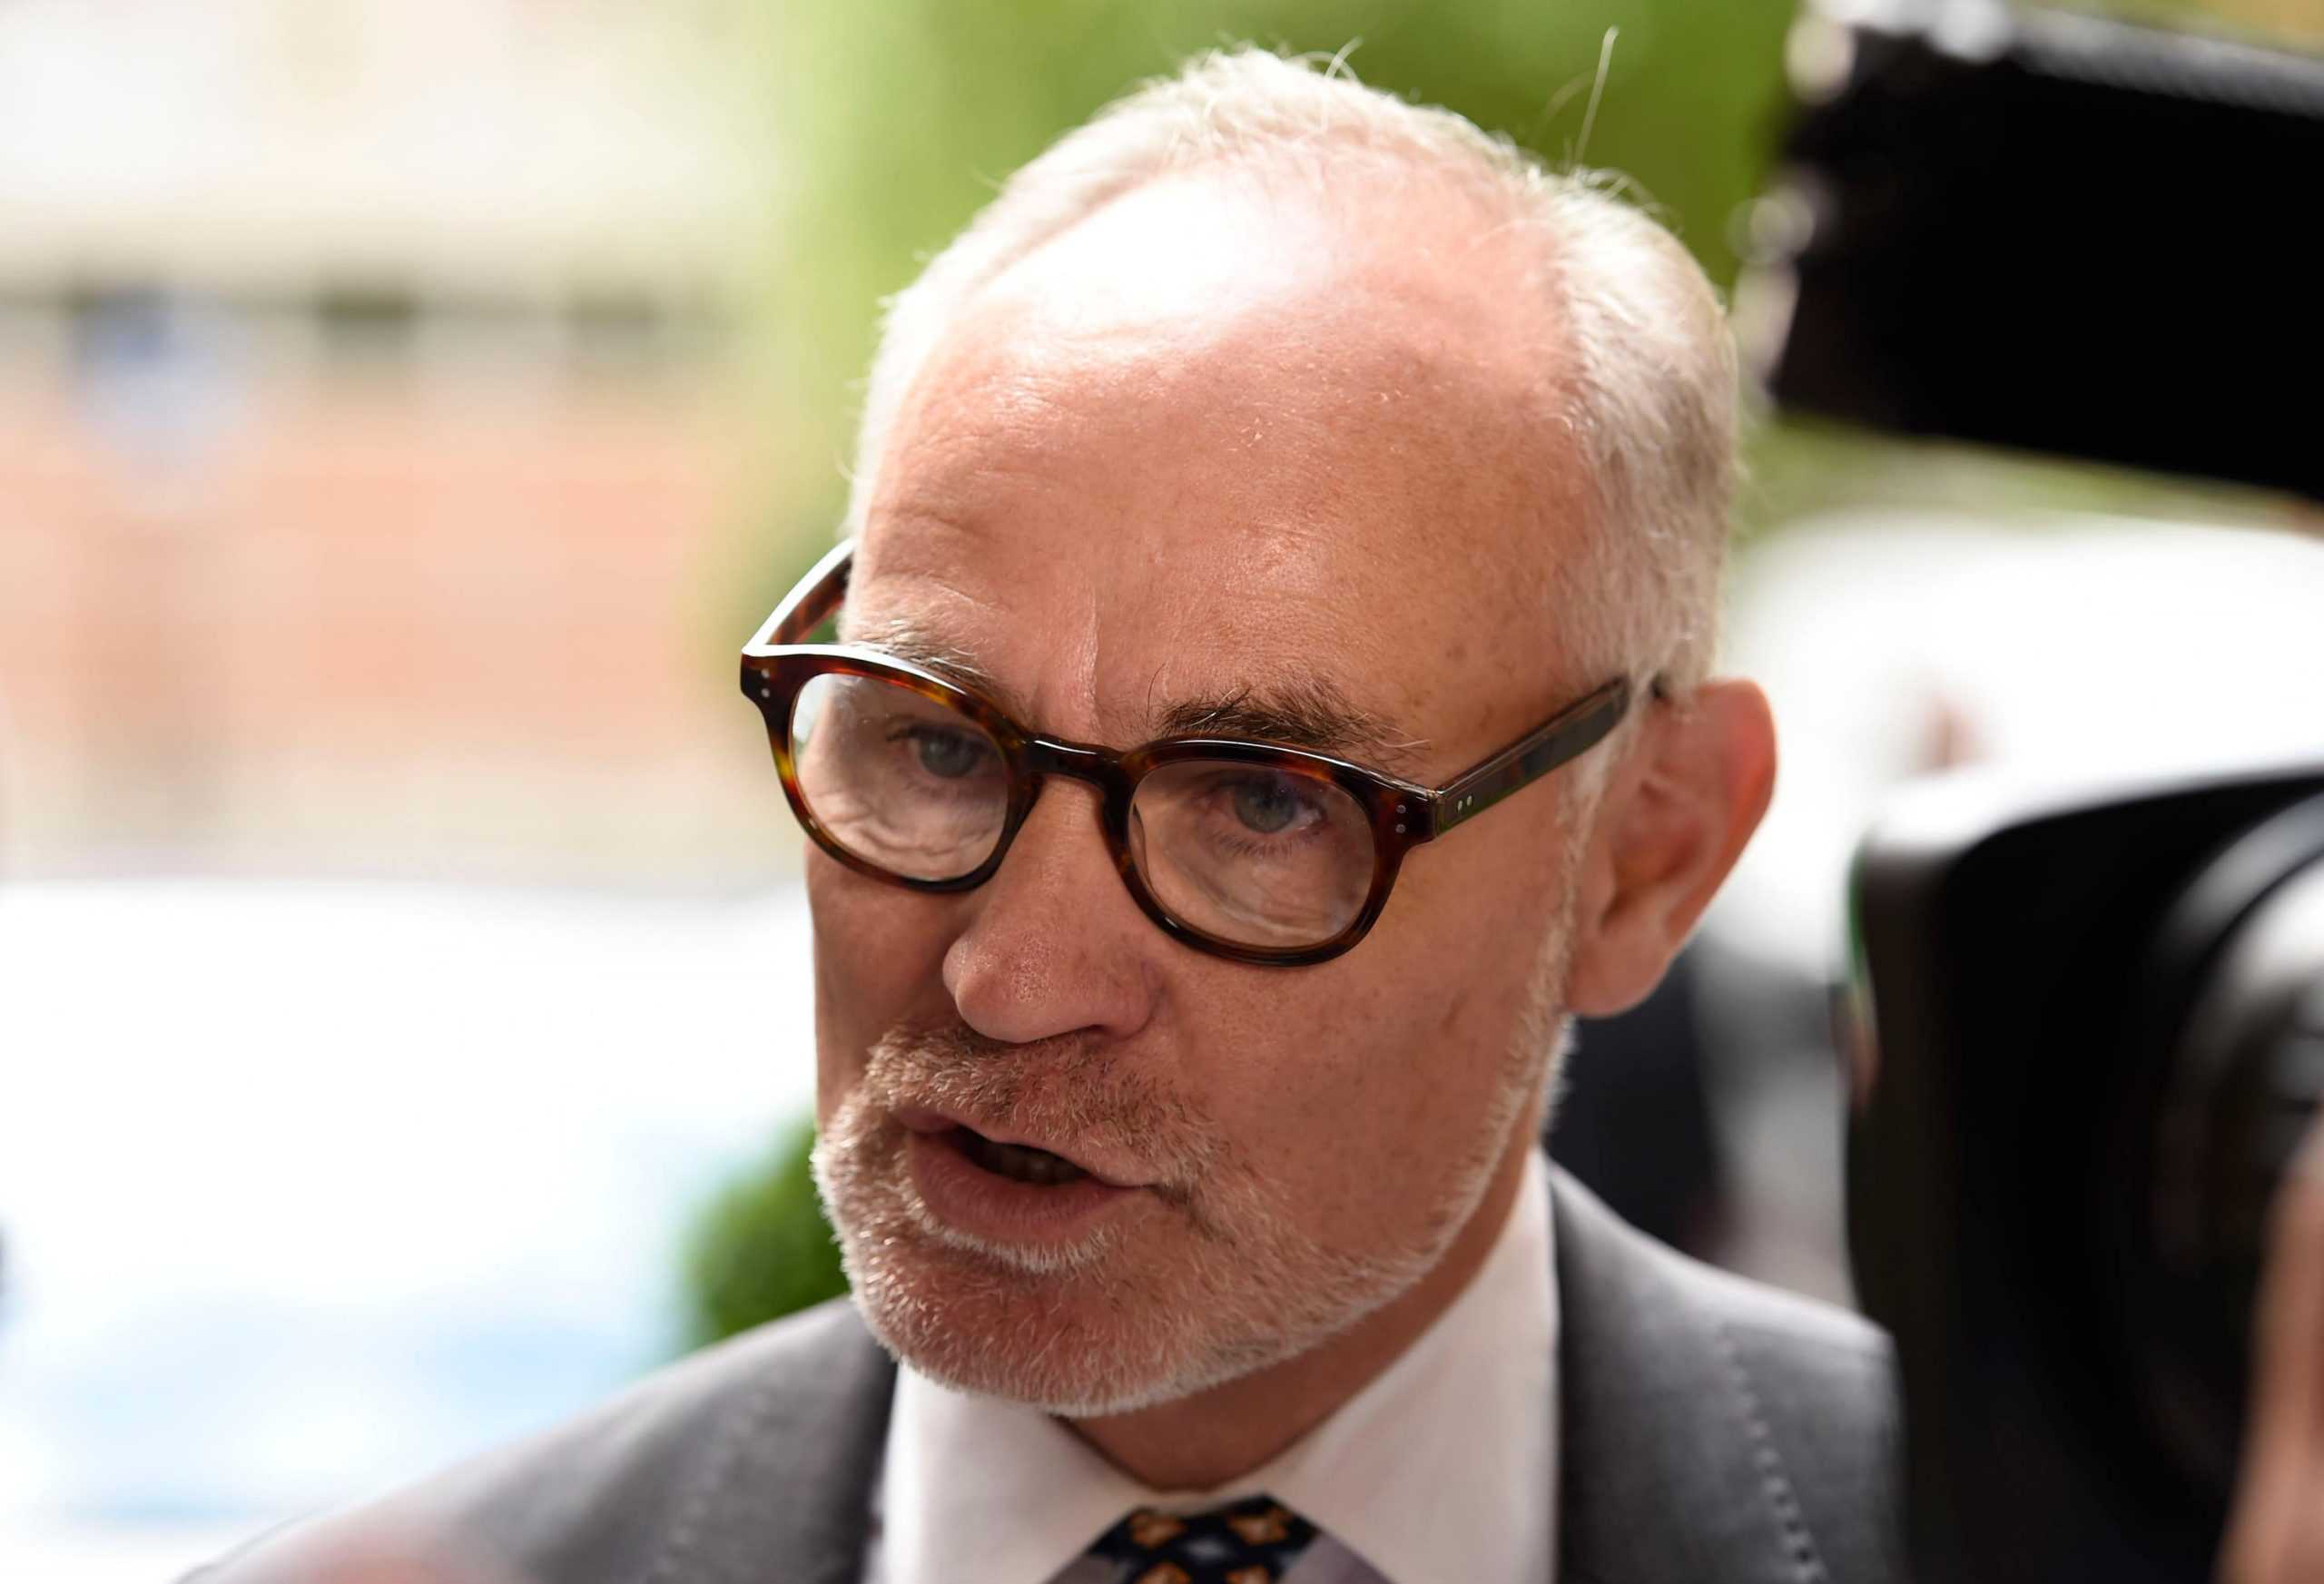 Tory MP arrested on rape charges is former minister Crispin Blunt 